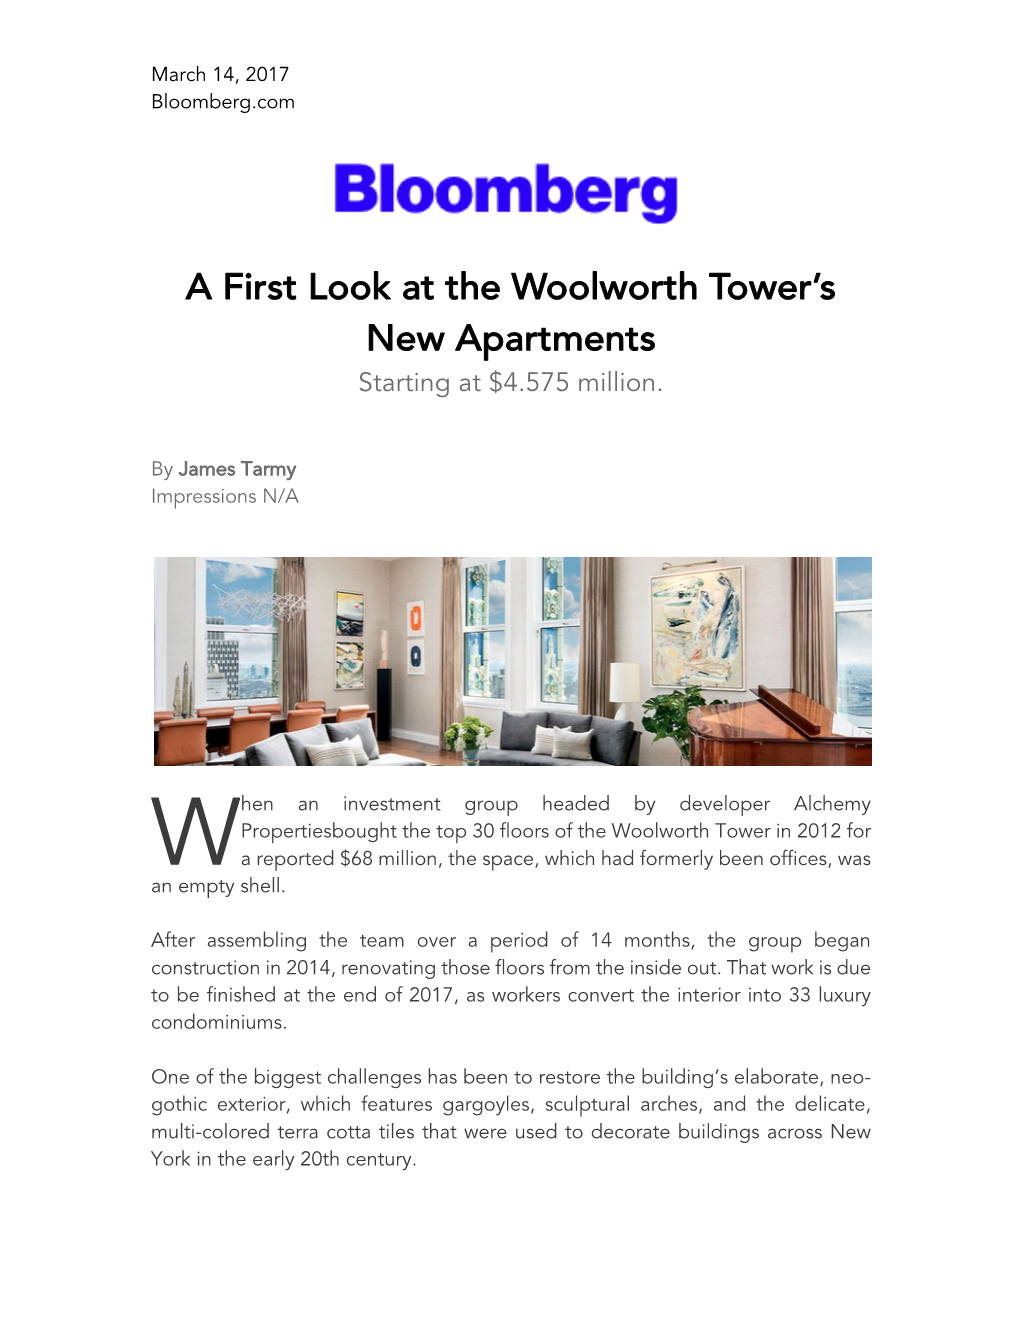 A First Look at the Woolworth Tower's New Apartments